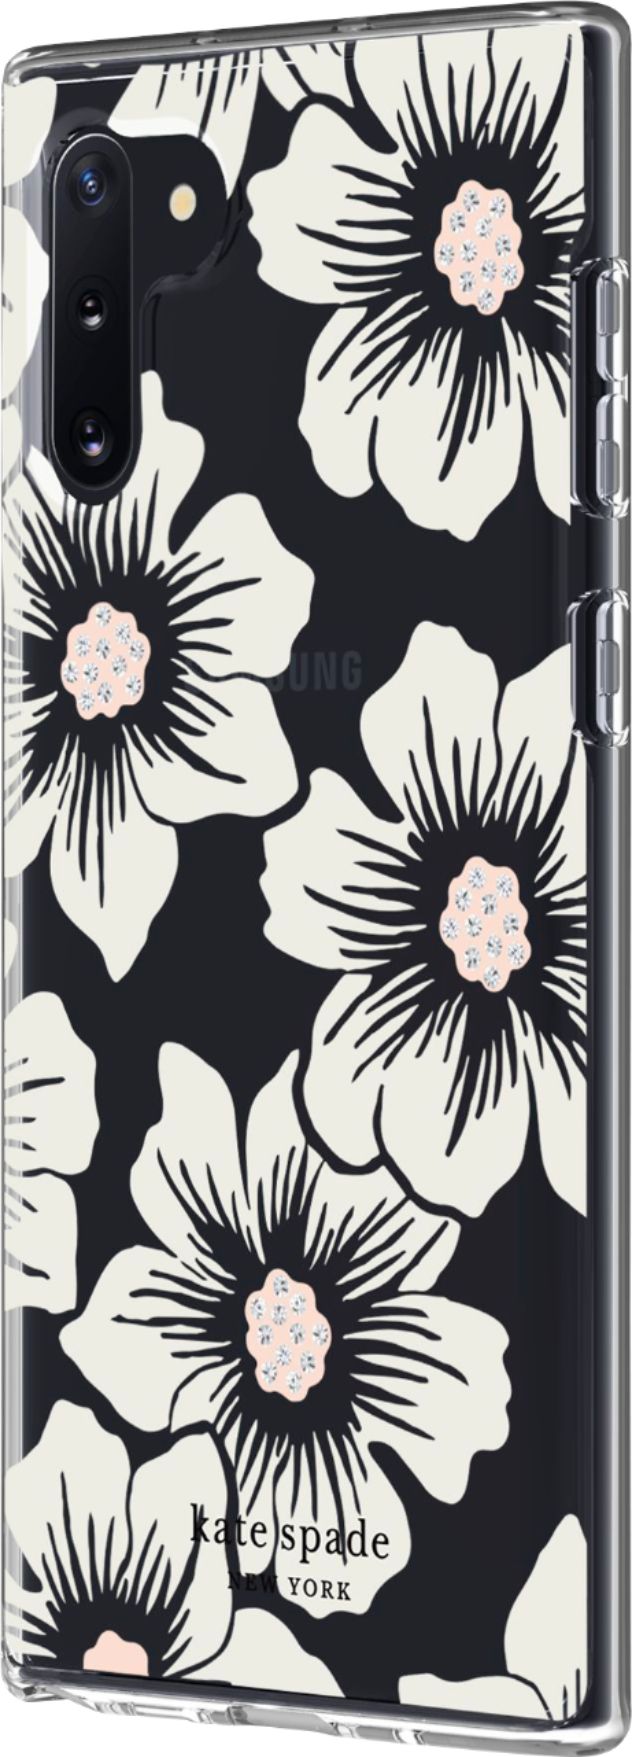 Best Buy: kate spade new york Hard Shell Case for Samsung Galaxy Note10  Hollyhock Floral Clear/Cream With Stones KSSA-057-HHCCS